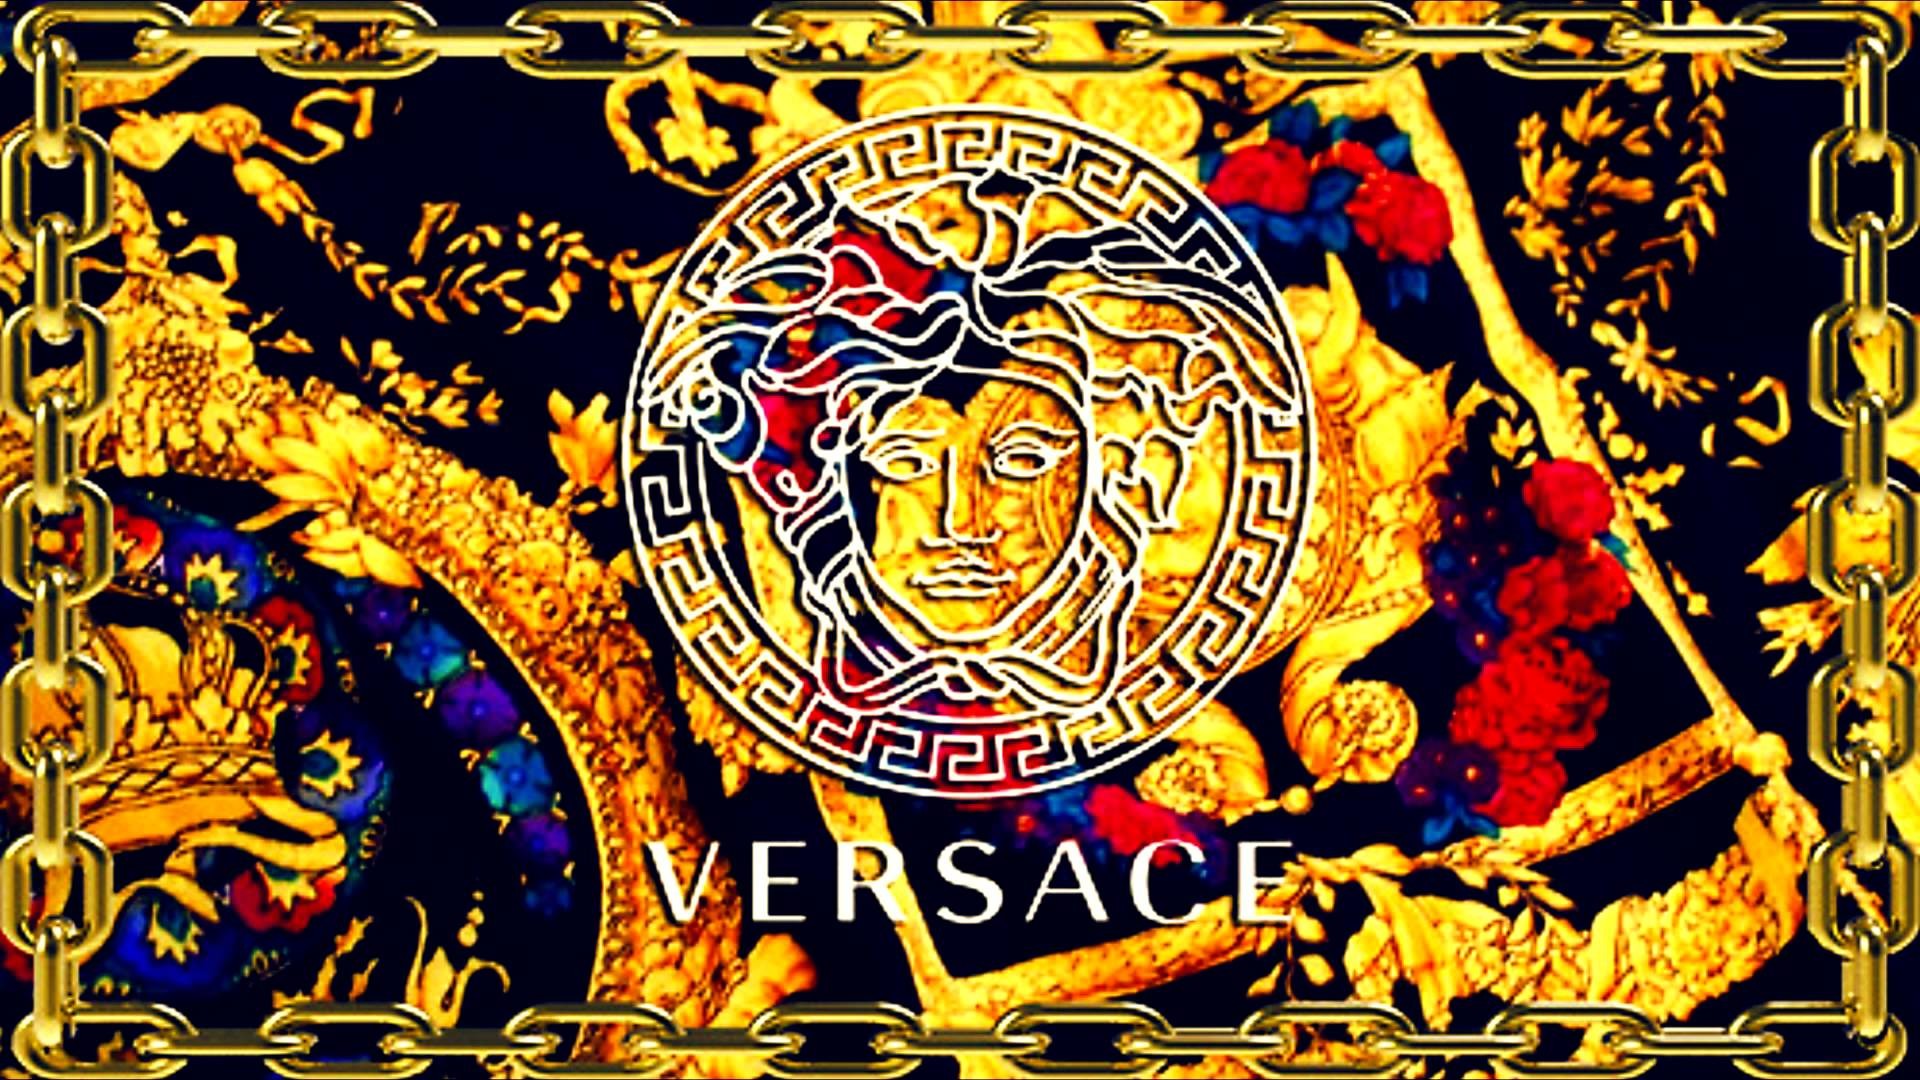 1920x1080 Versace Wallpapers HD | HD Wallpapers, Backgrounds, Images, Art ..